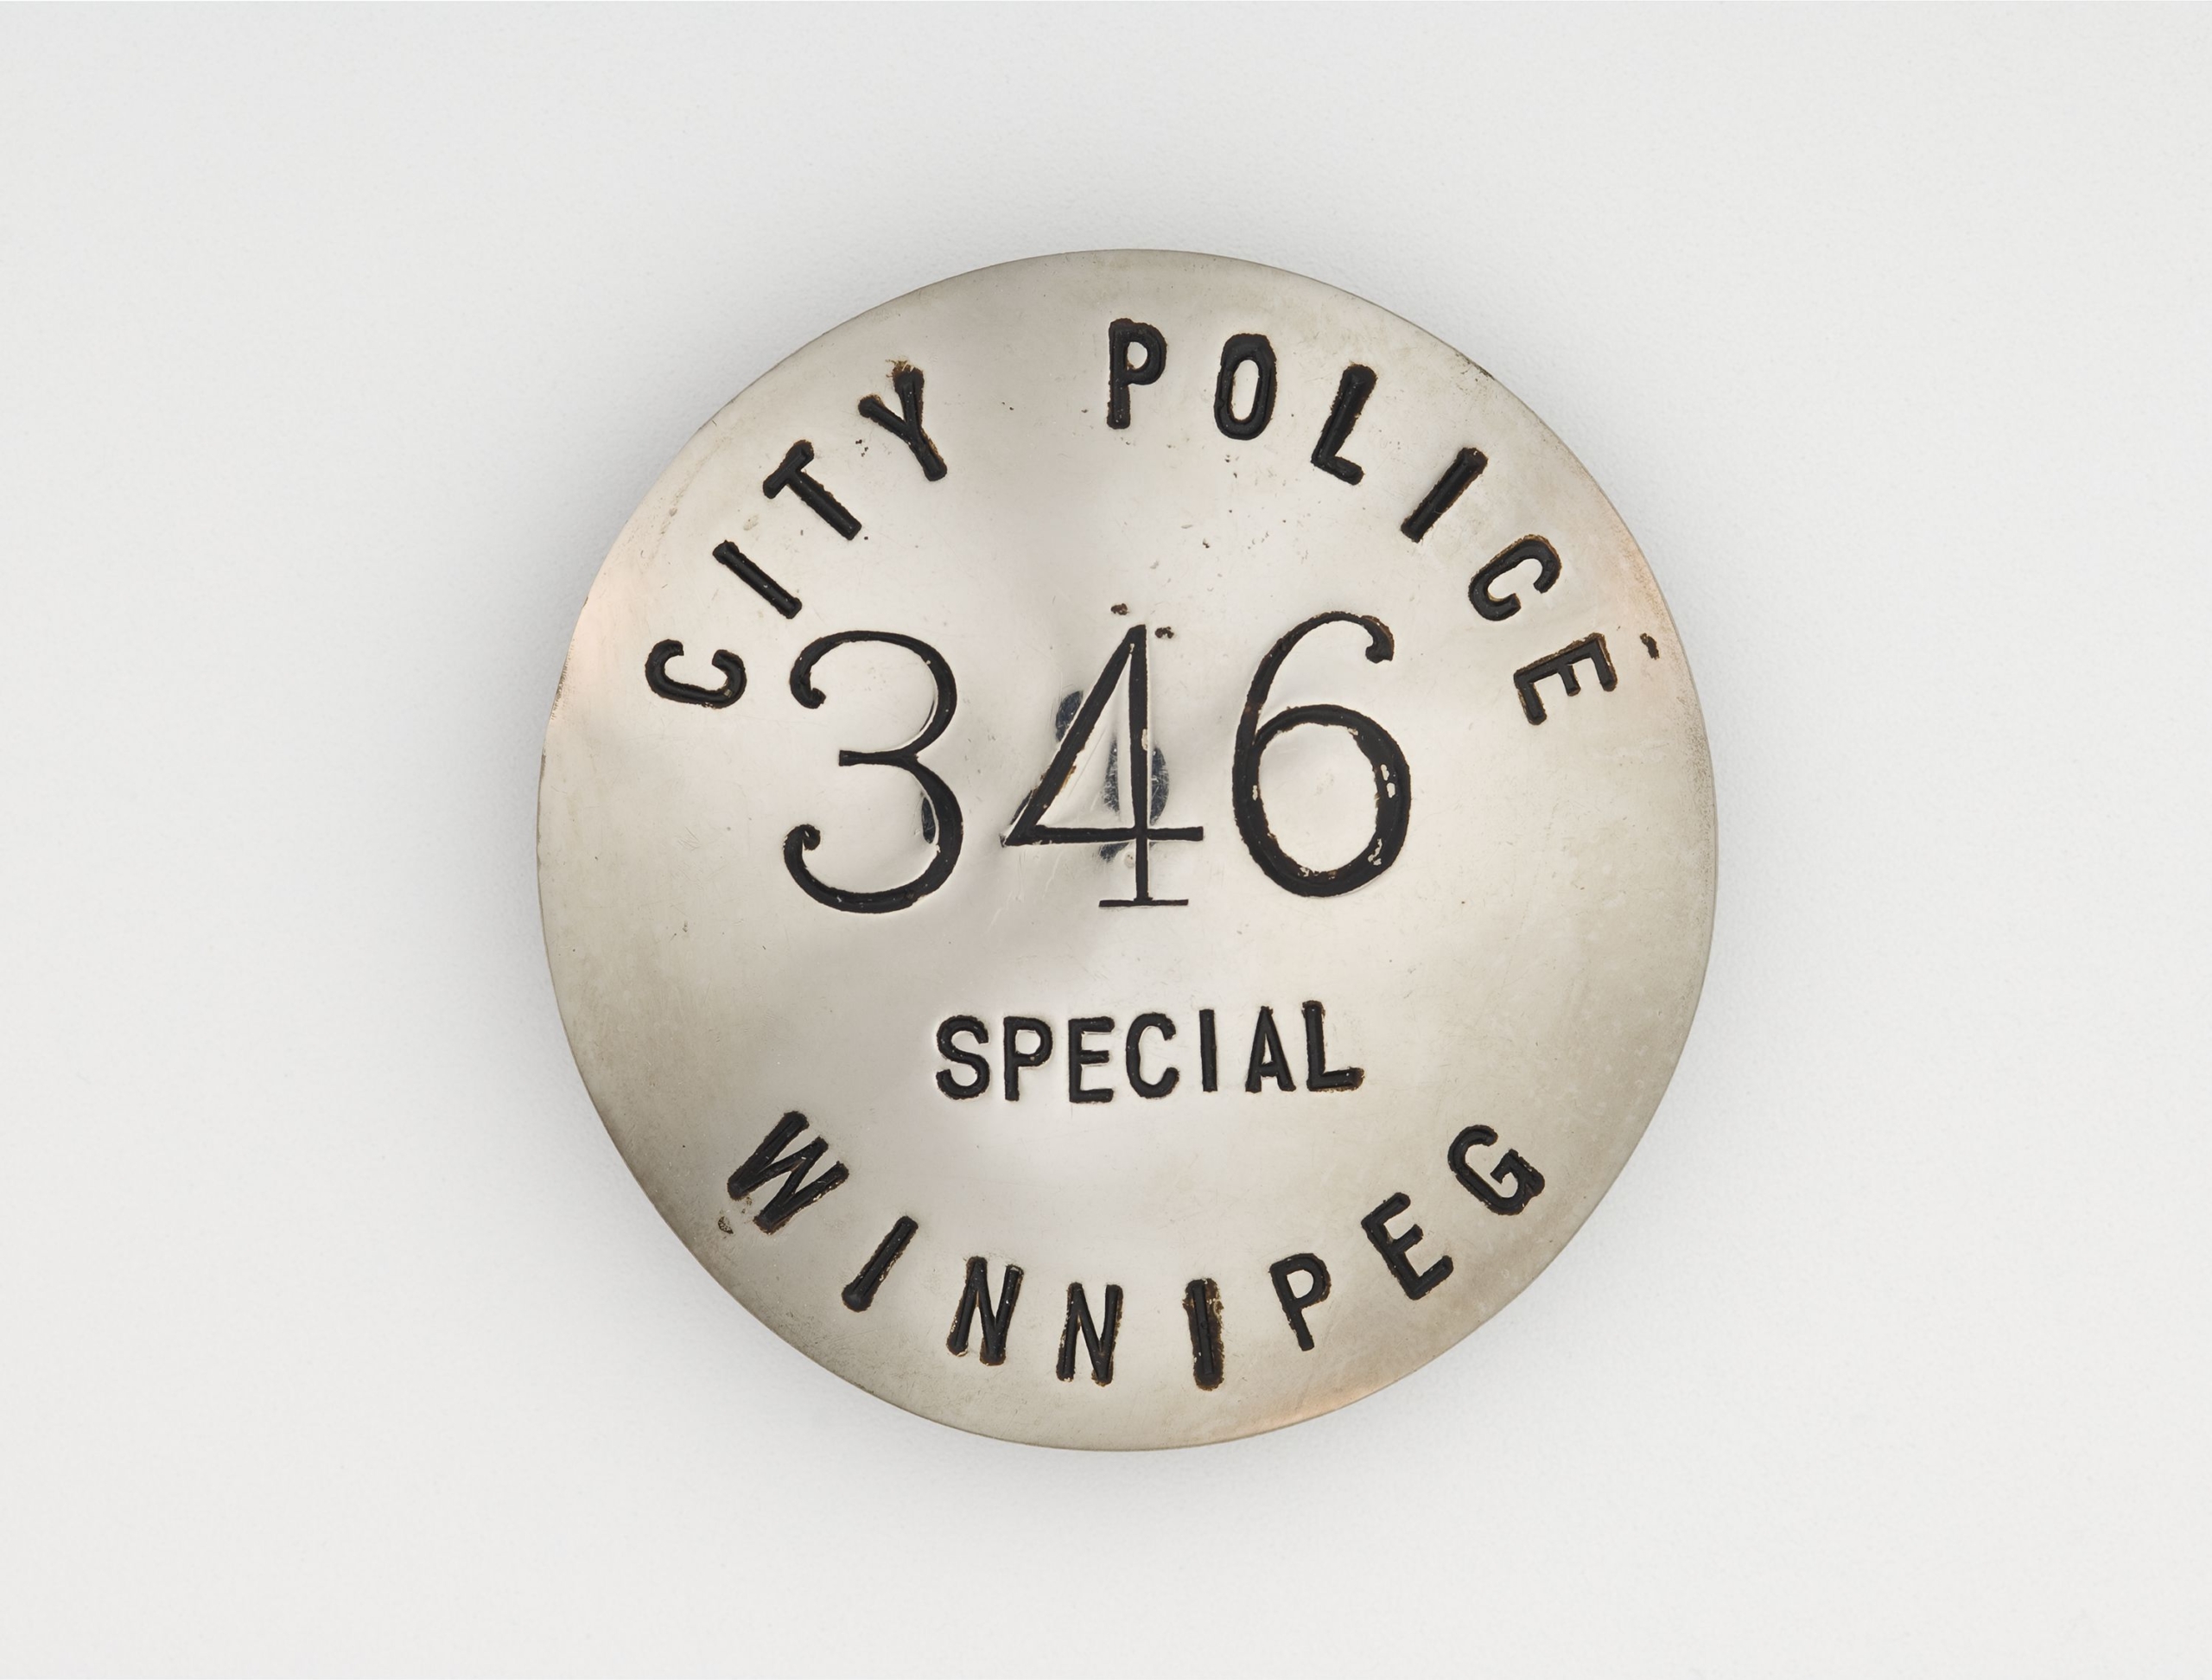 Round silver badge that reads City Police 346 Special Winnipeg